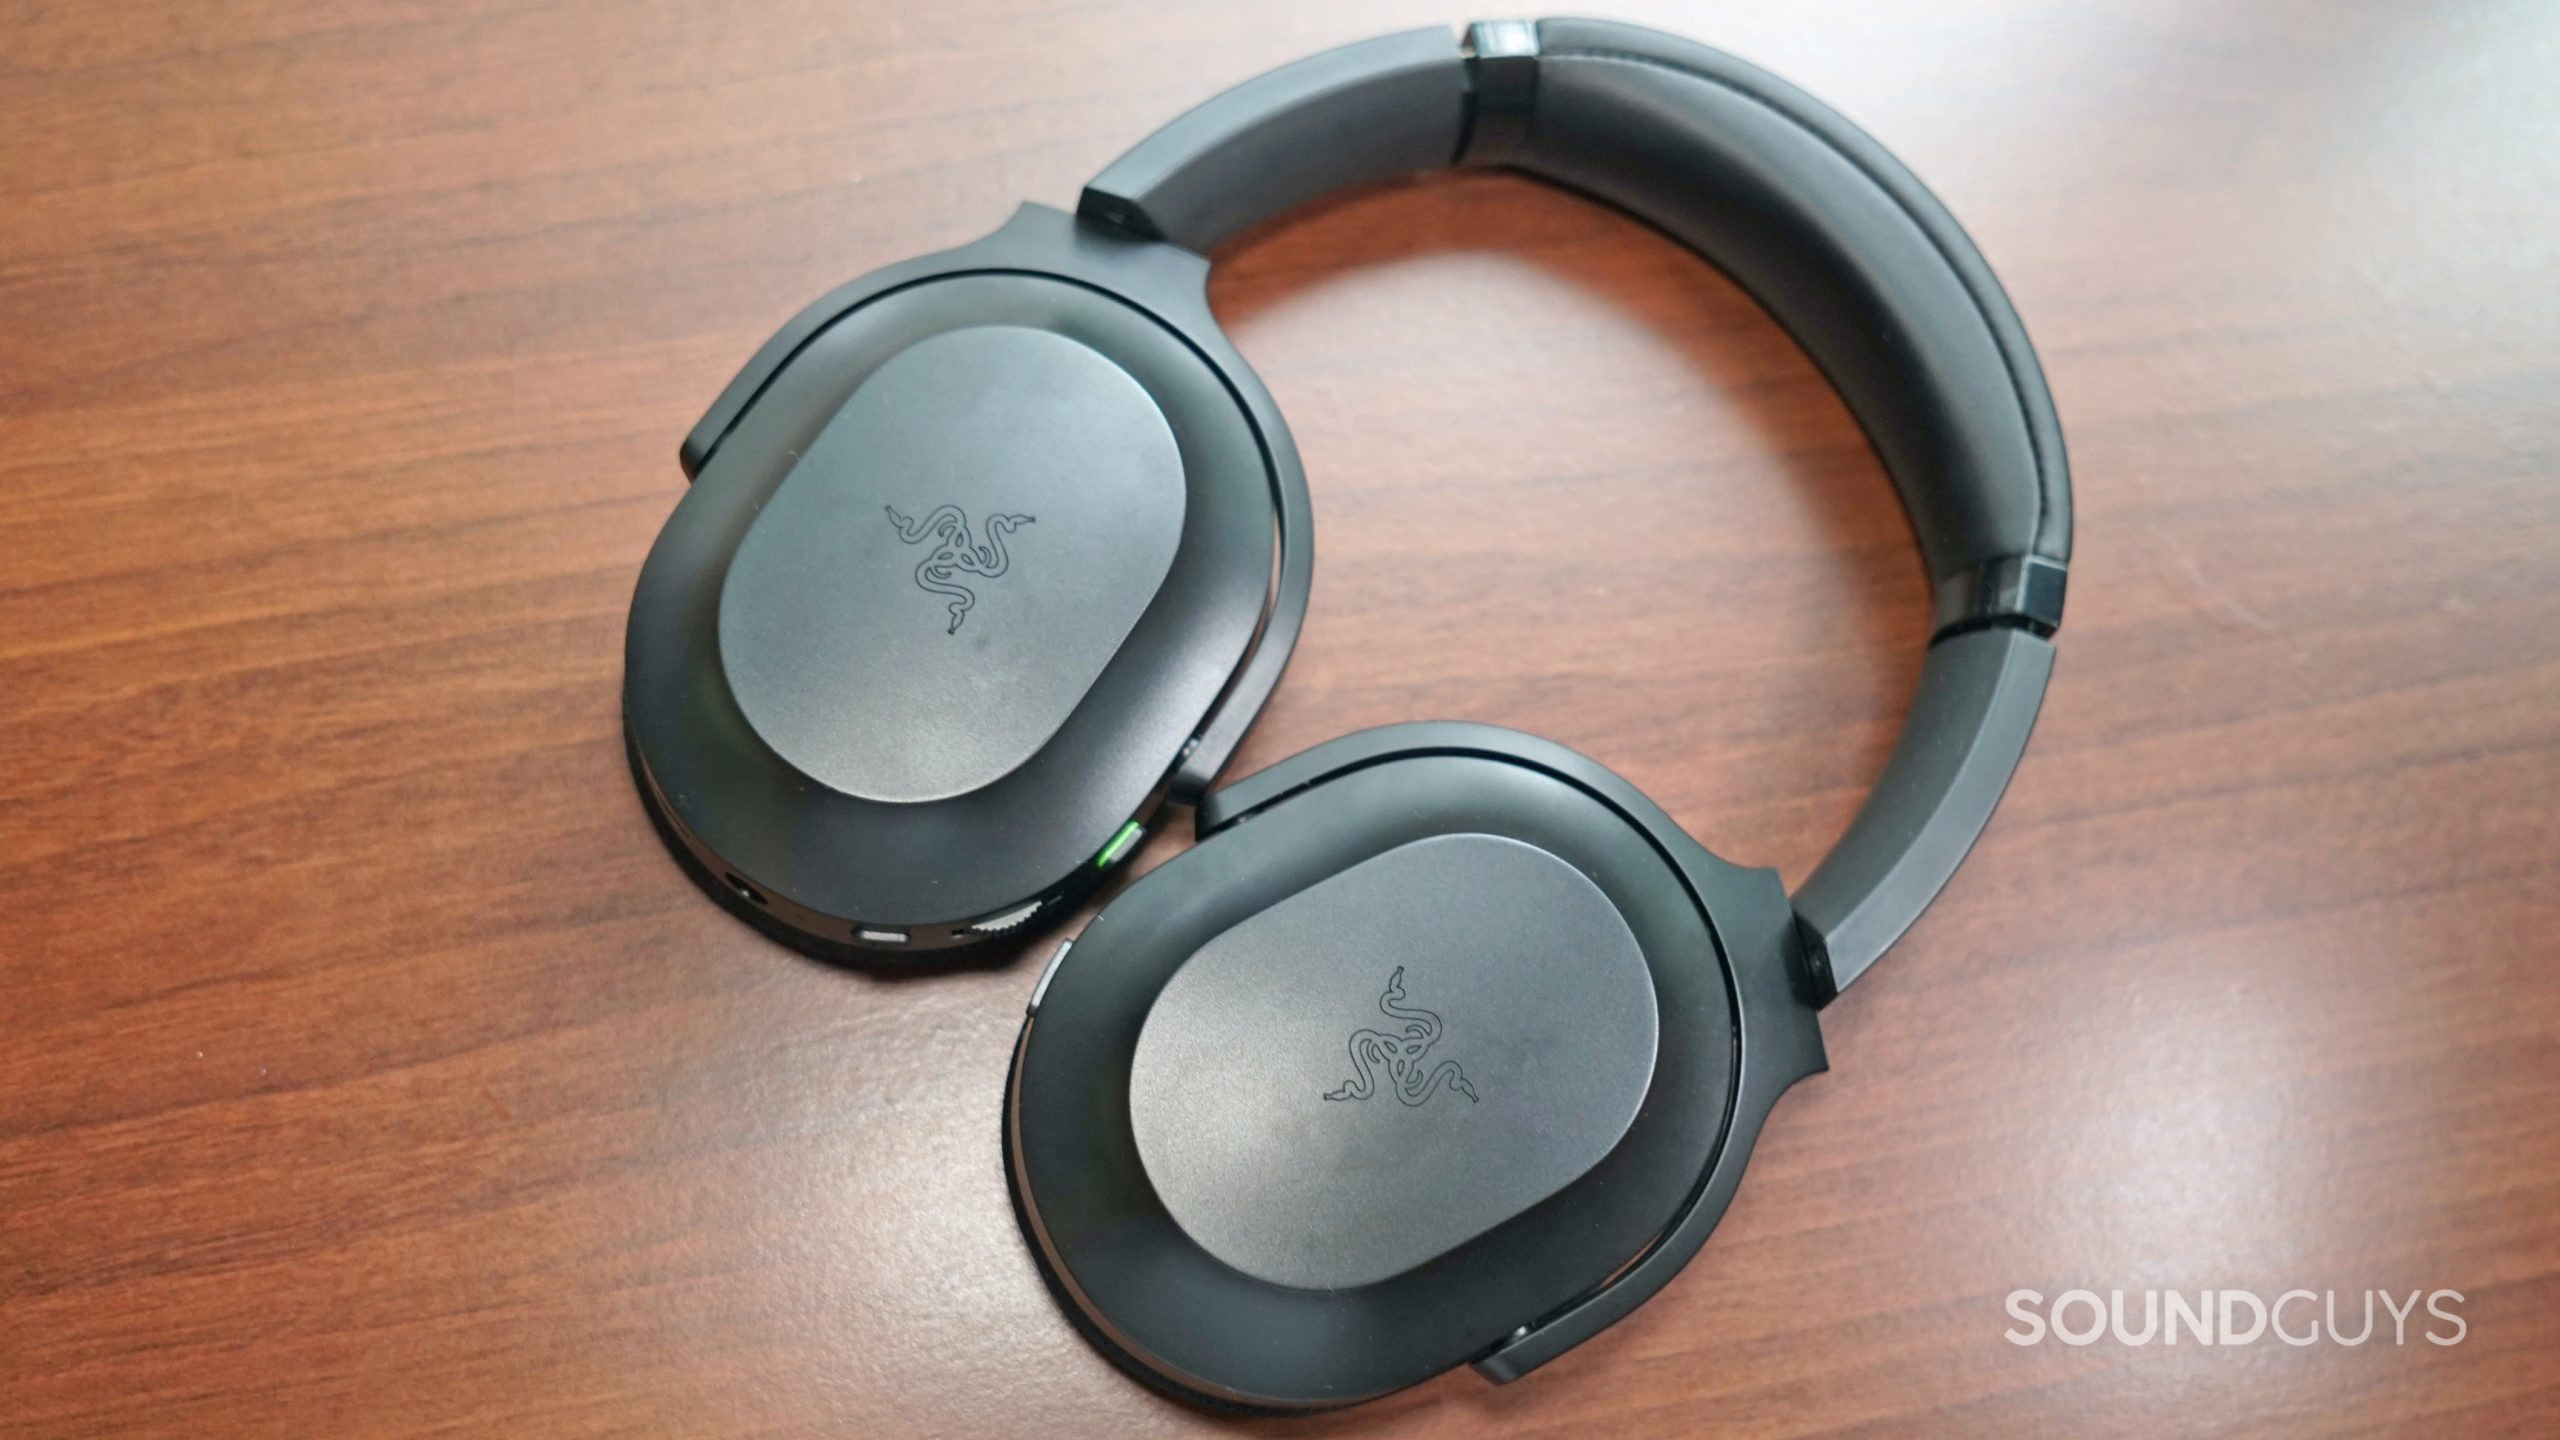 Razer Barracuda X Review - A step up in audio quality - GamerBraves